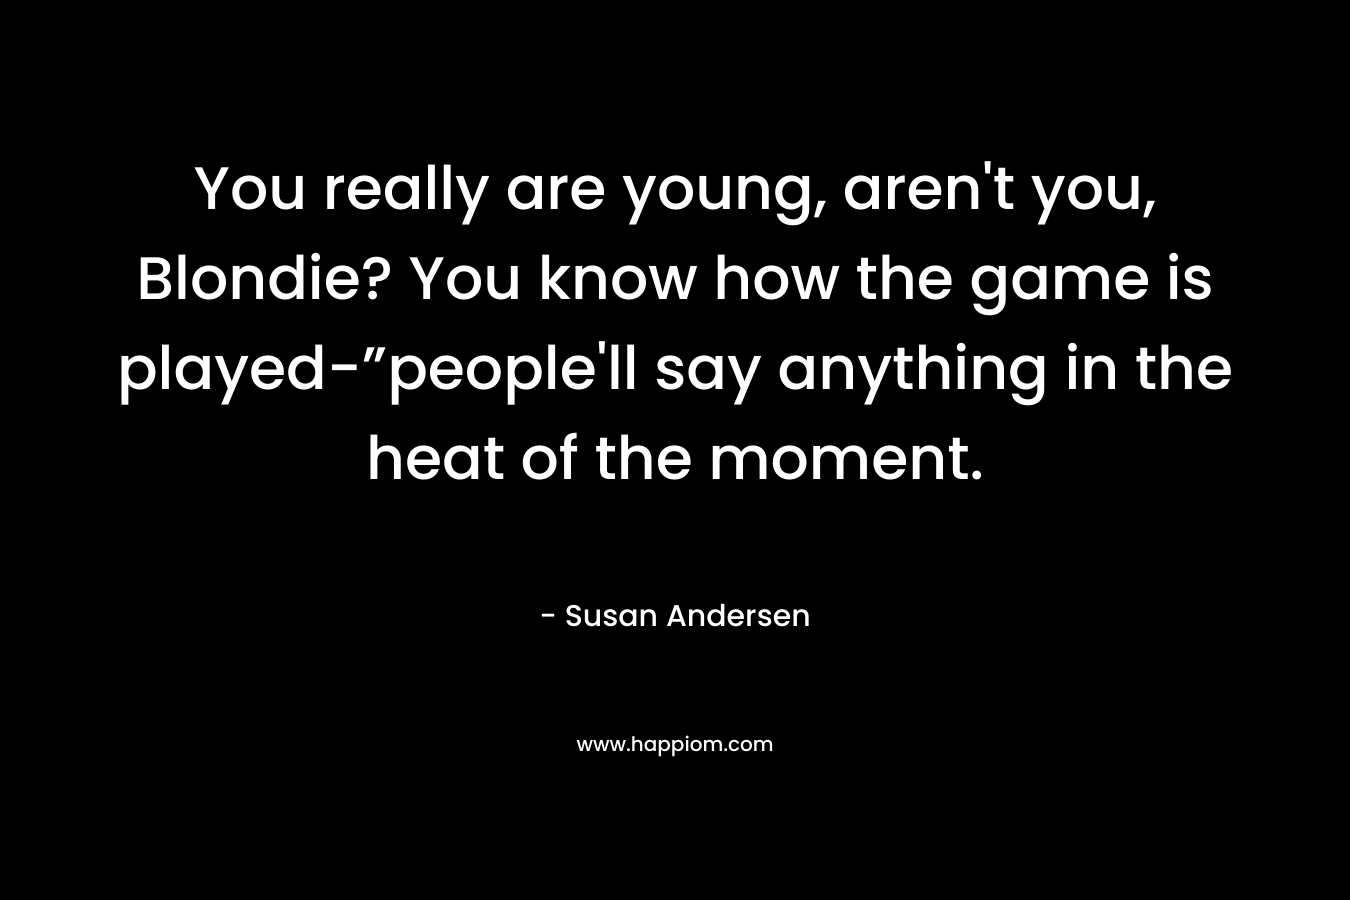 You really are young, aren’t you, Blondie? You know how the game is played-”people’ll say anything in the heat of the moment. – Susan Andersen